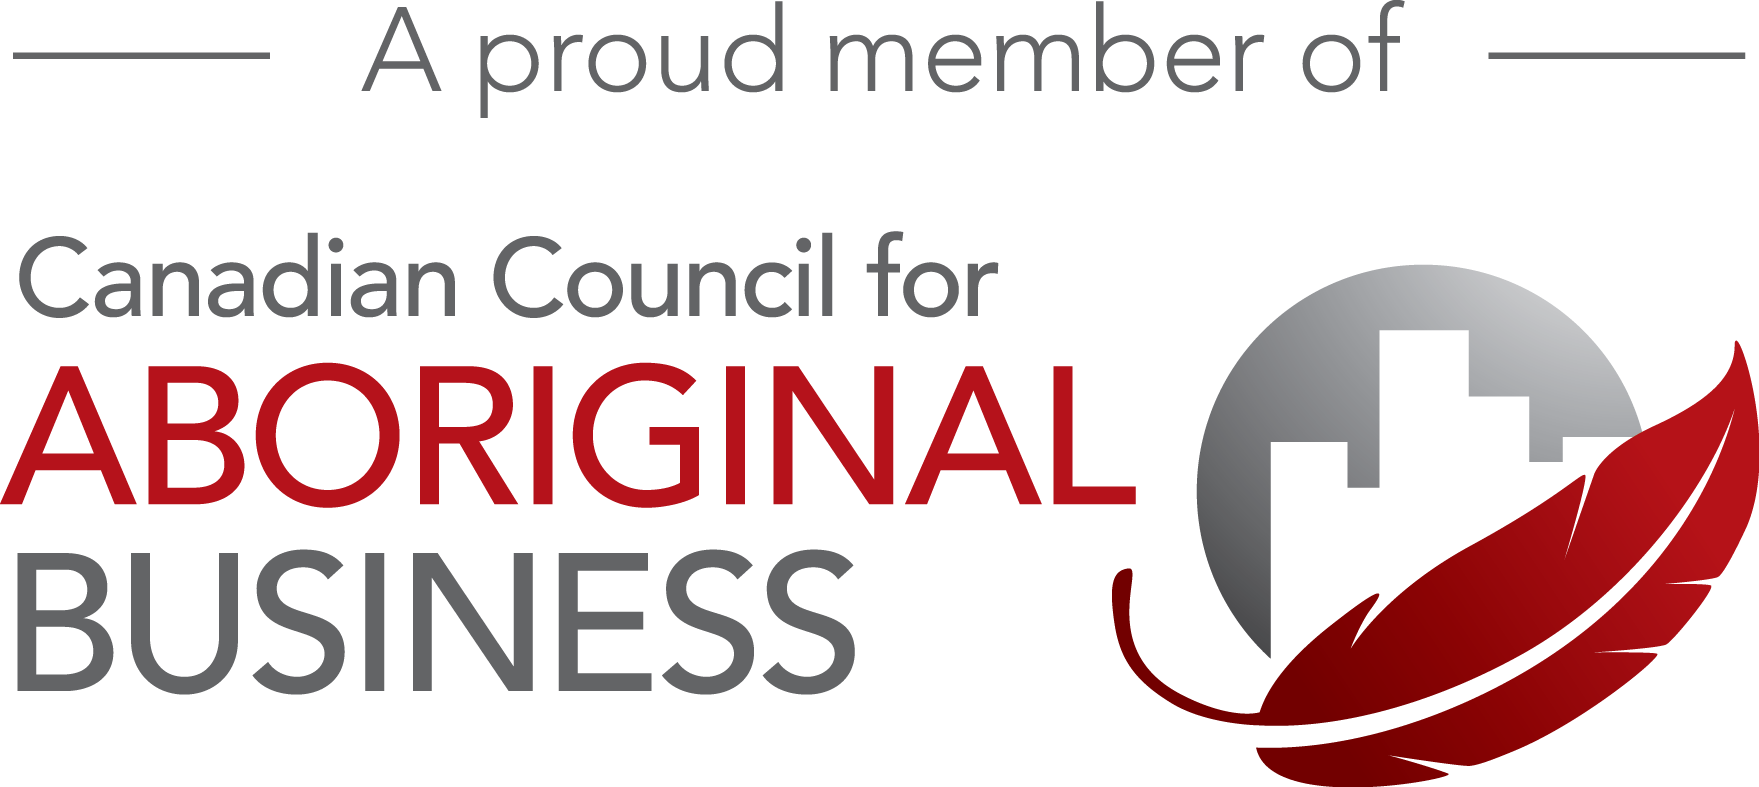 A proud member of Canadian Council for Aboriginal Business